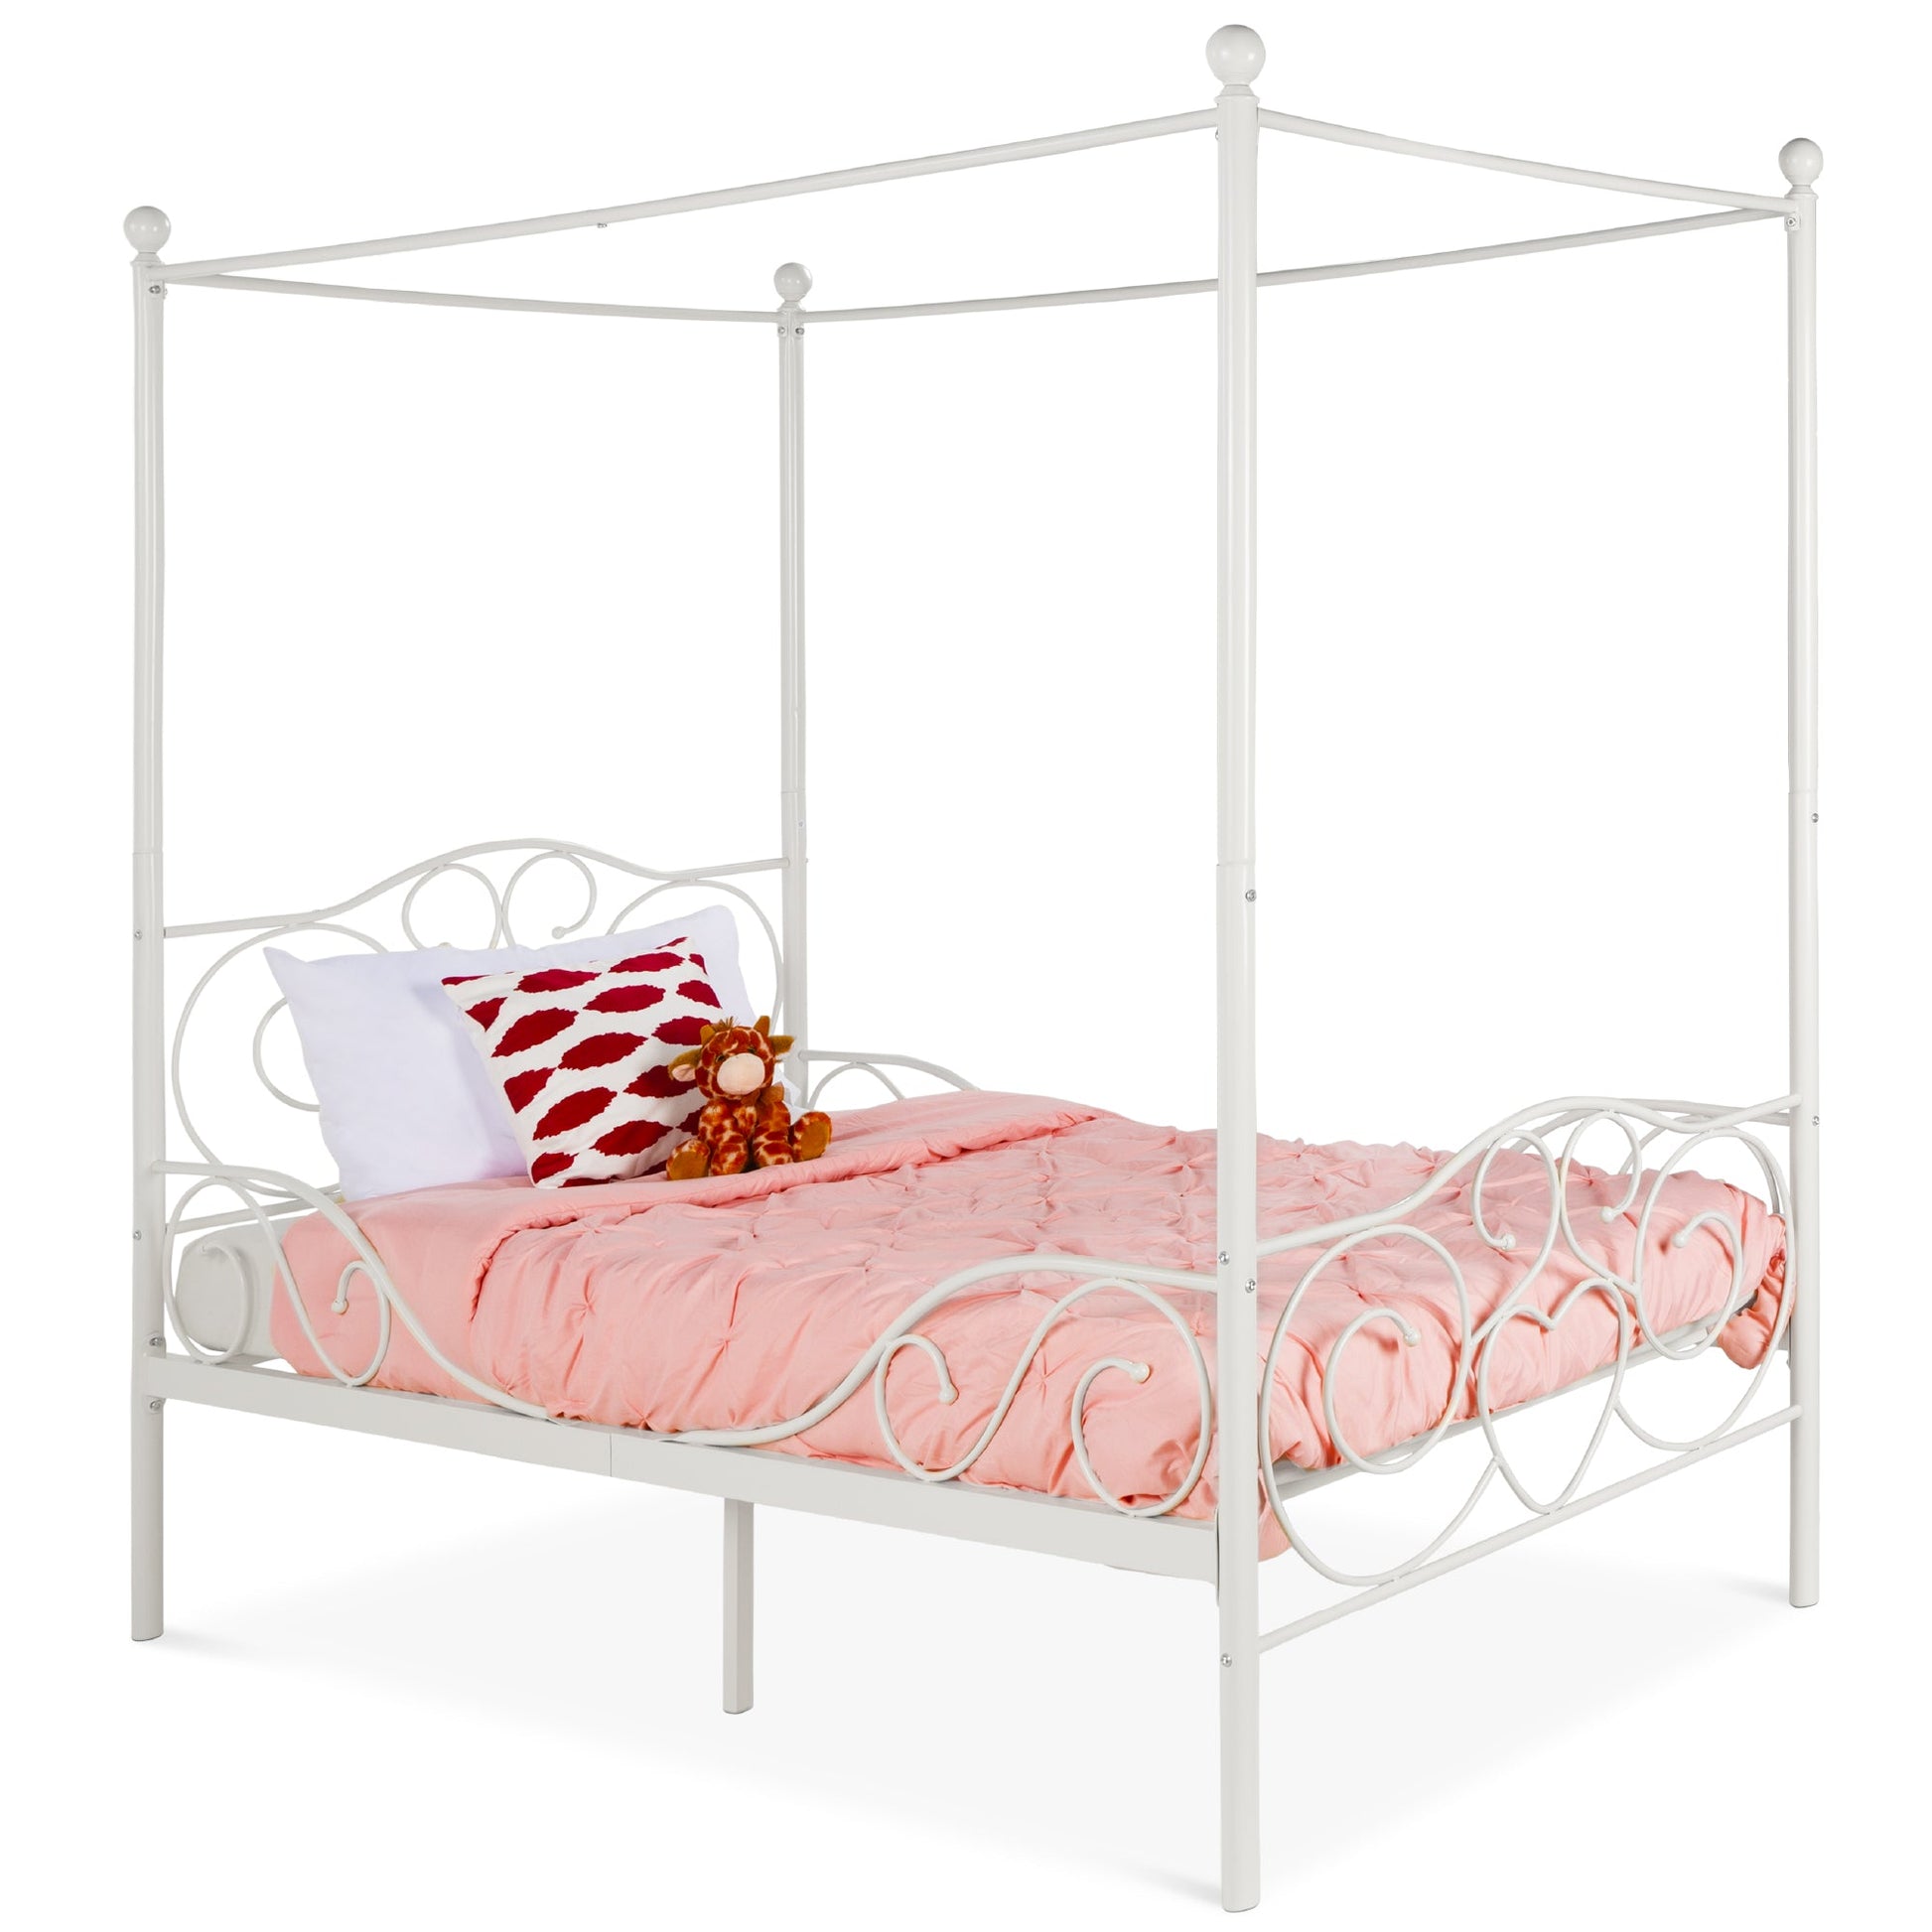 Classic 4-Post Metal Canopy Twin Bed Frame w/ Heart Scroll Design